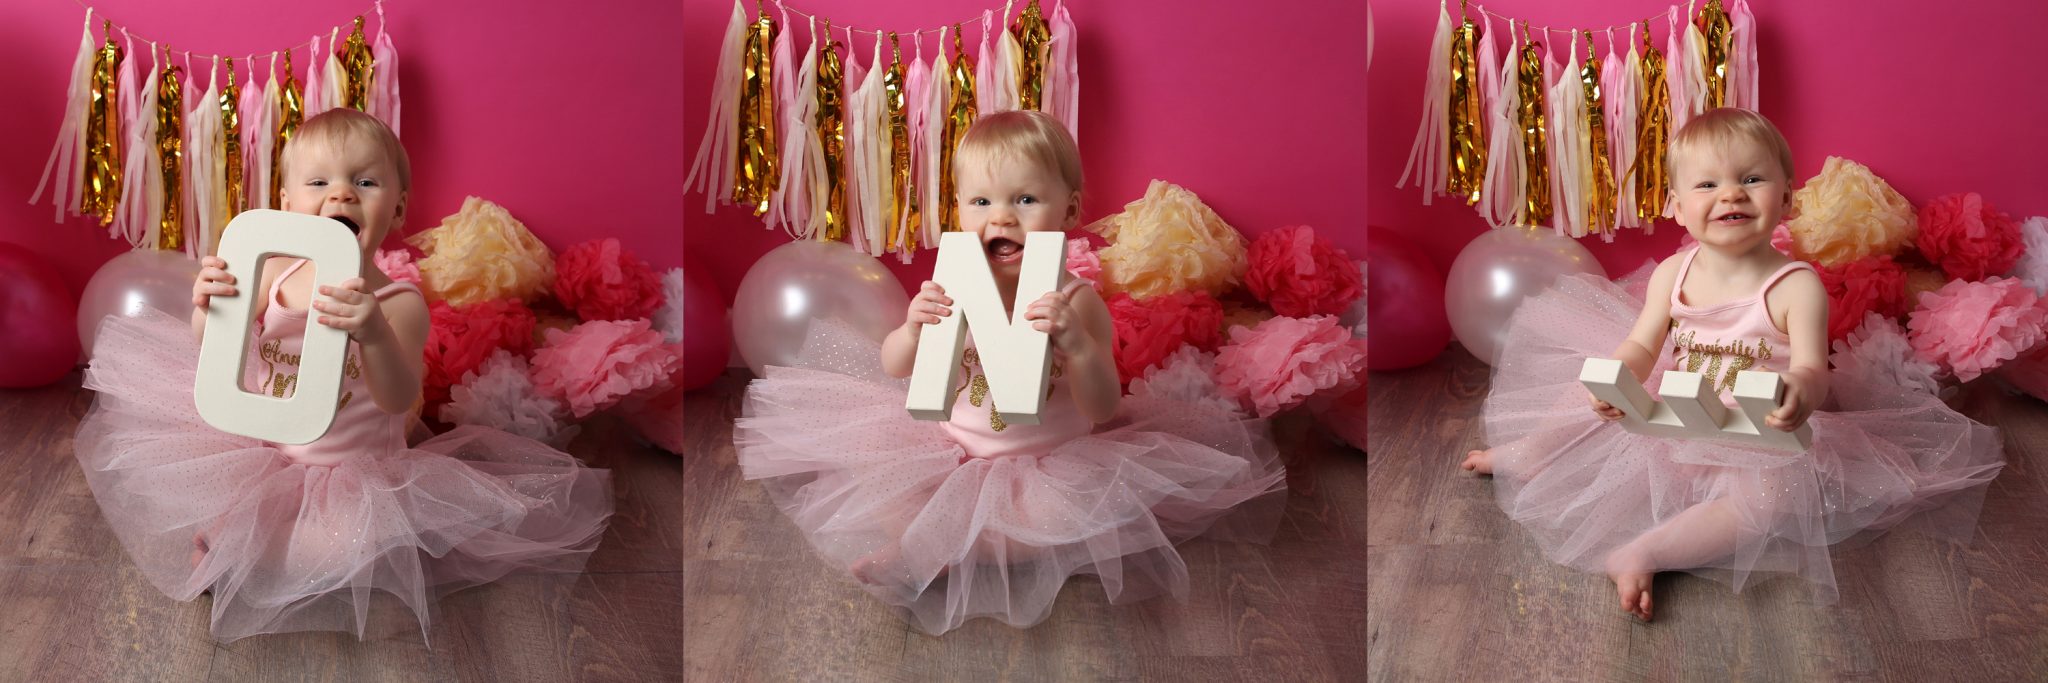 Little girl holding ONE prop 3 images stitched together pink backdrop with pink props and tutu at cakesmash photoshoot east grinstead